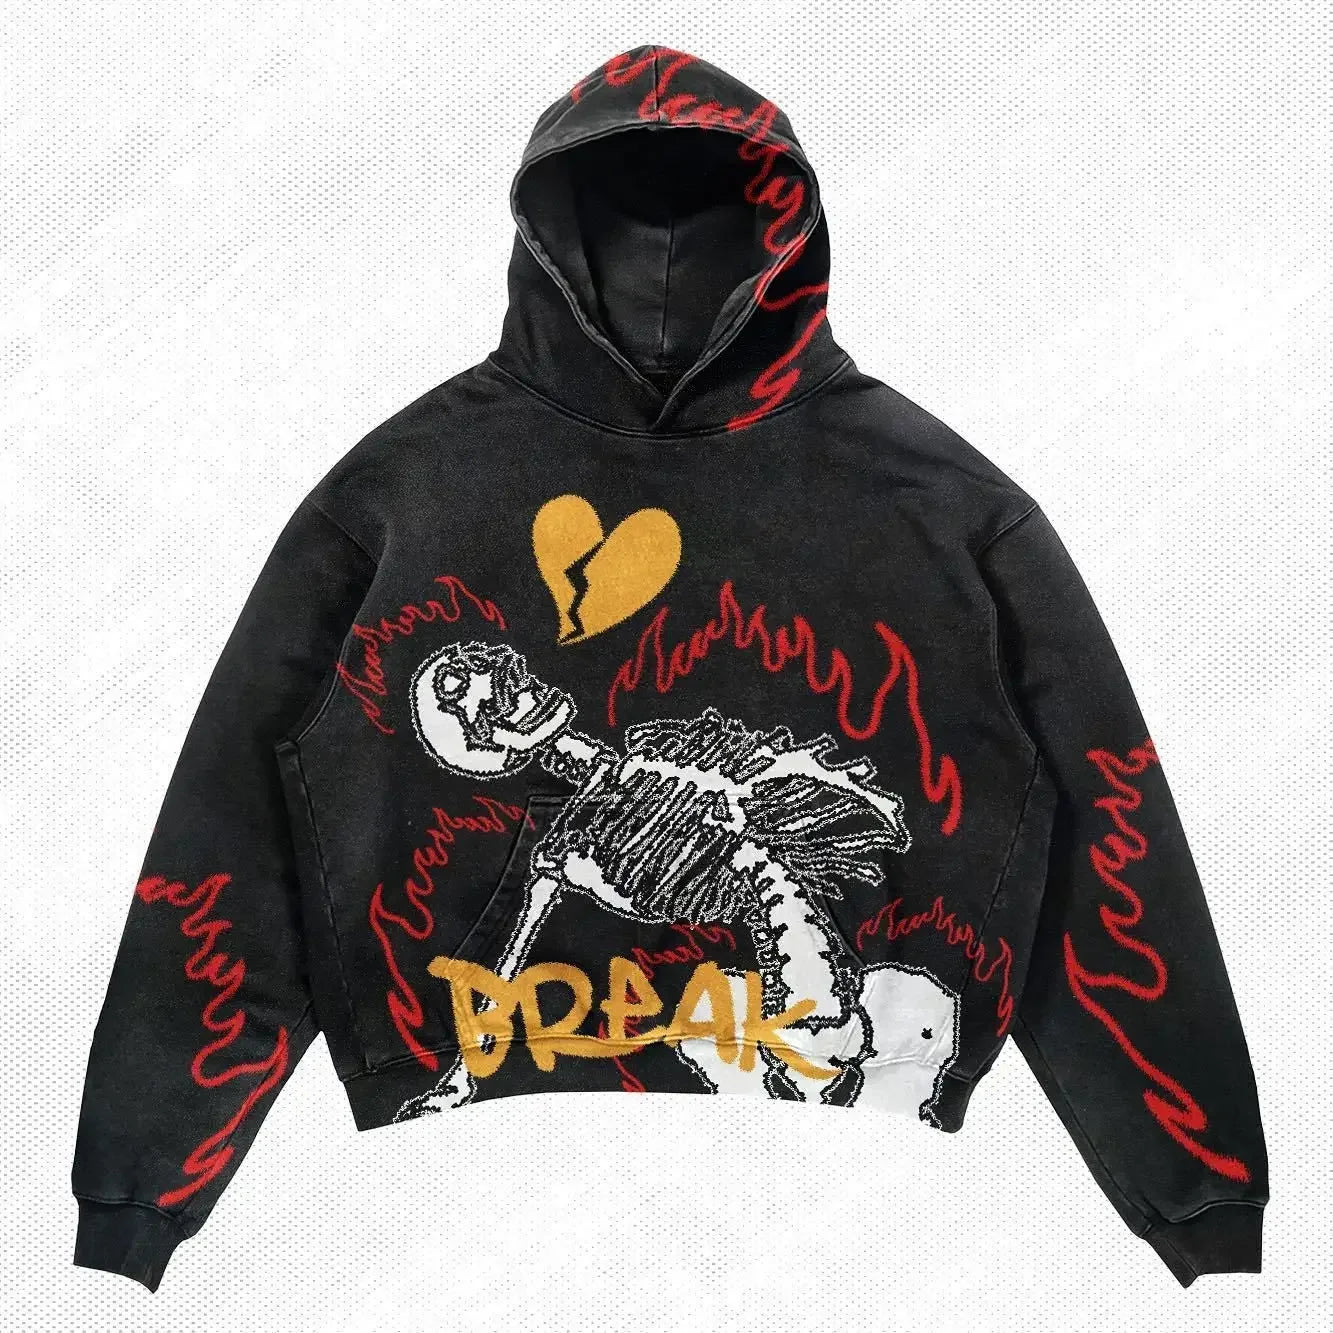 A black polyester hoodie in punk style with a skeleton and flames design, featuring the word "BREAK" and a broken heart graphic. Introducing the Explosions Printed Skull Y2K Retro Hooded Sweater Coat Street Style Gothic Casual Fashion Hooded Sweater Men's Female by Maramalive™.